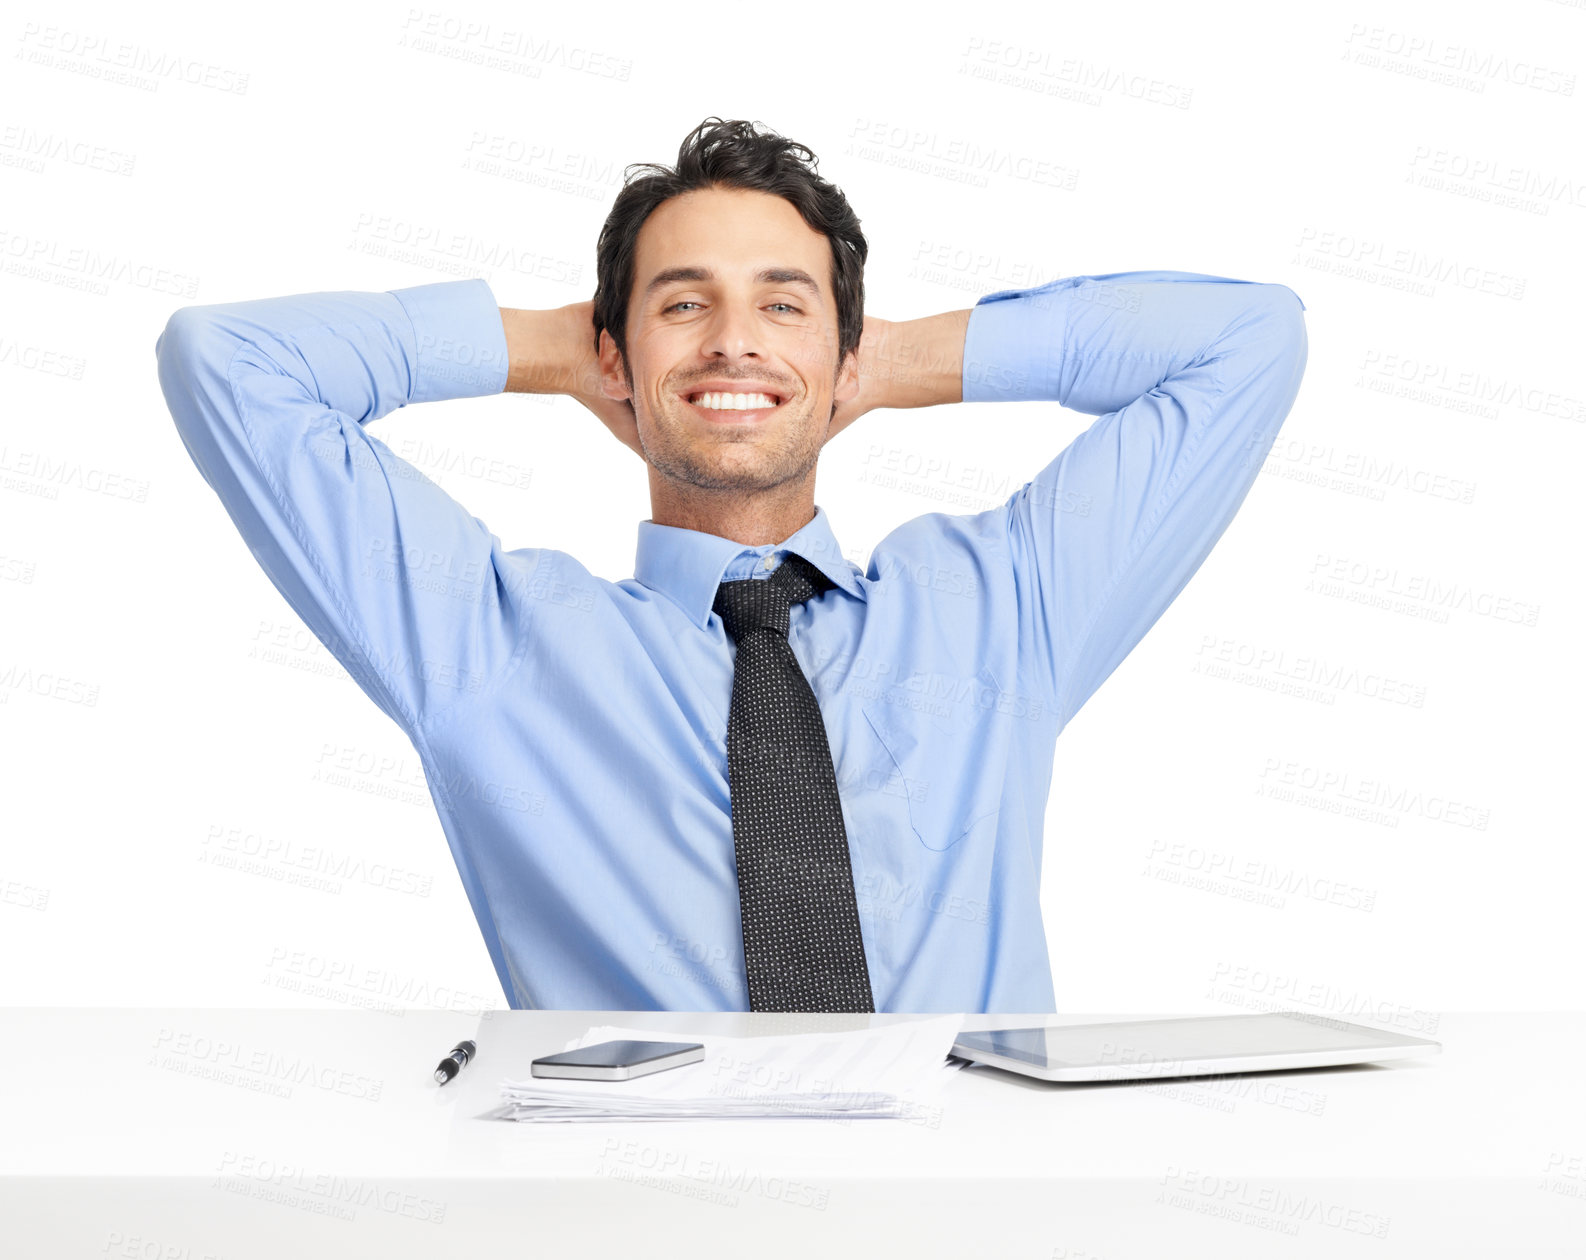 Buy stock photo Businessman, portrait or hands behind head on studio background in complete finance task, relax or done. Smile, happy or corporate worker stretching in success by desk and fintech technology or paper